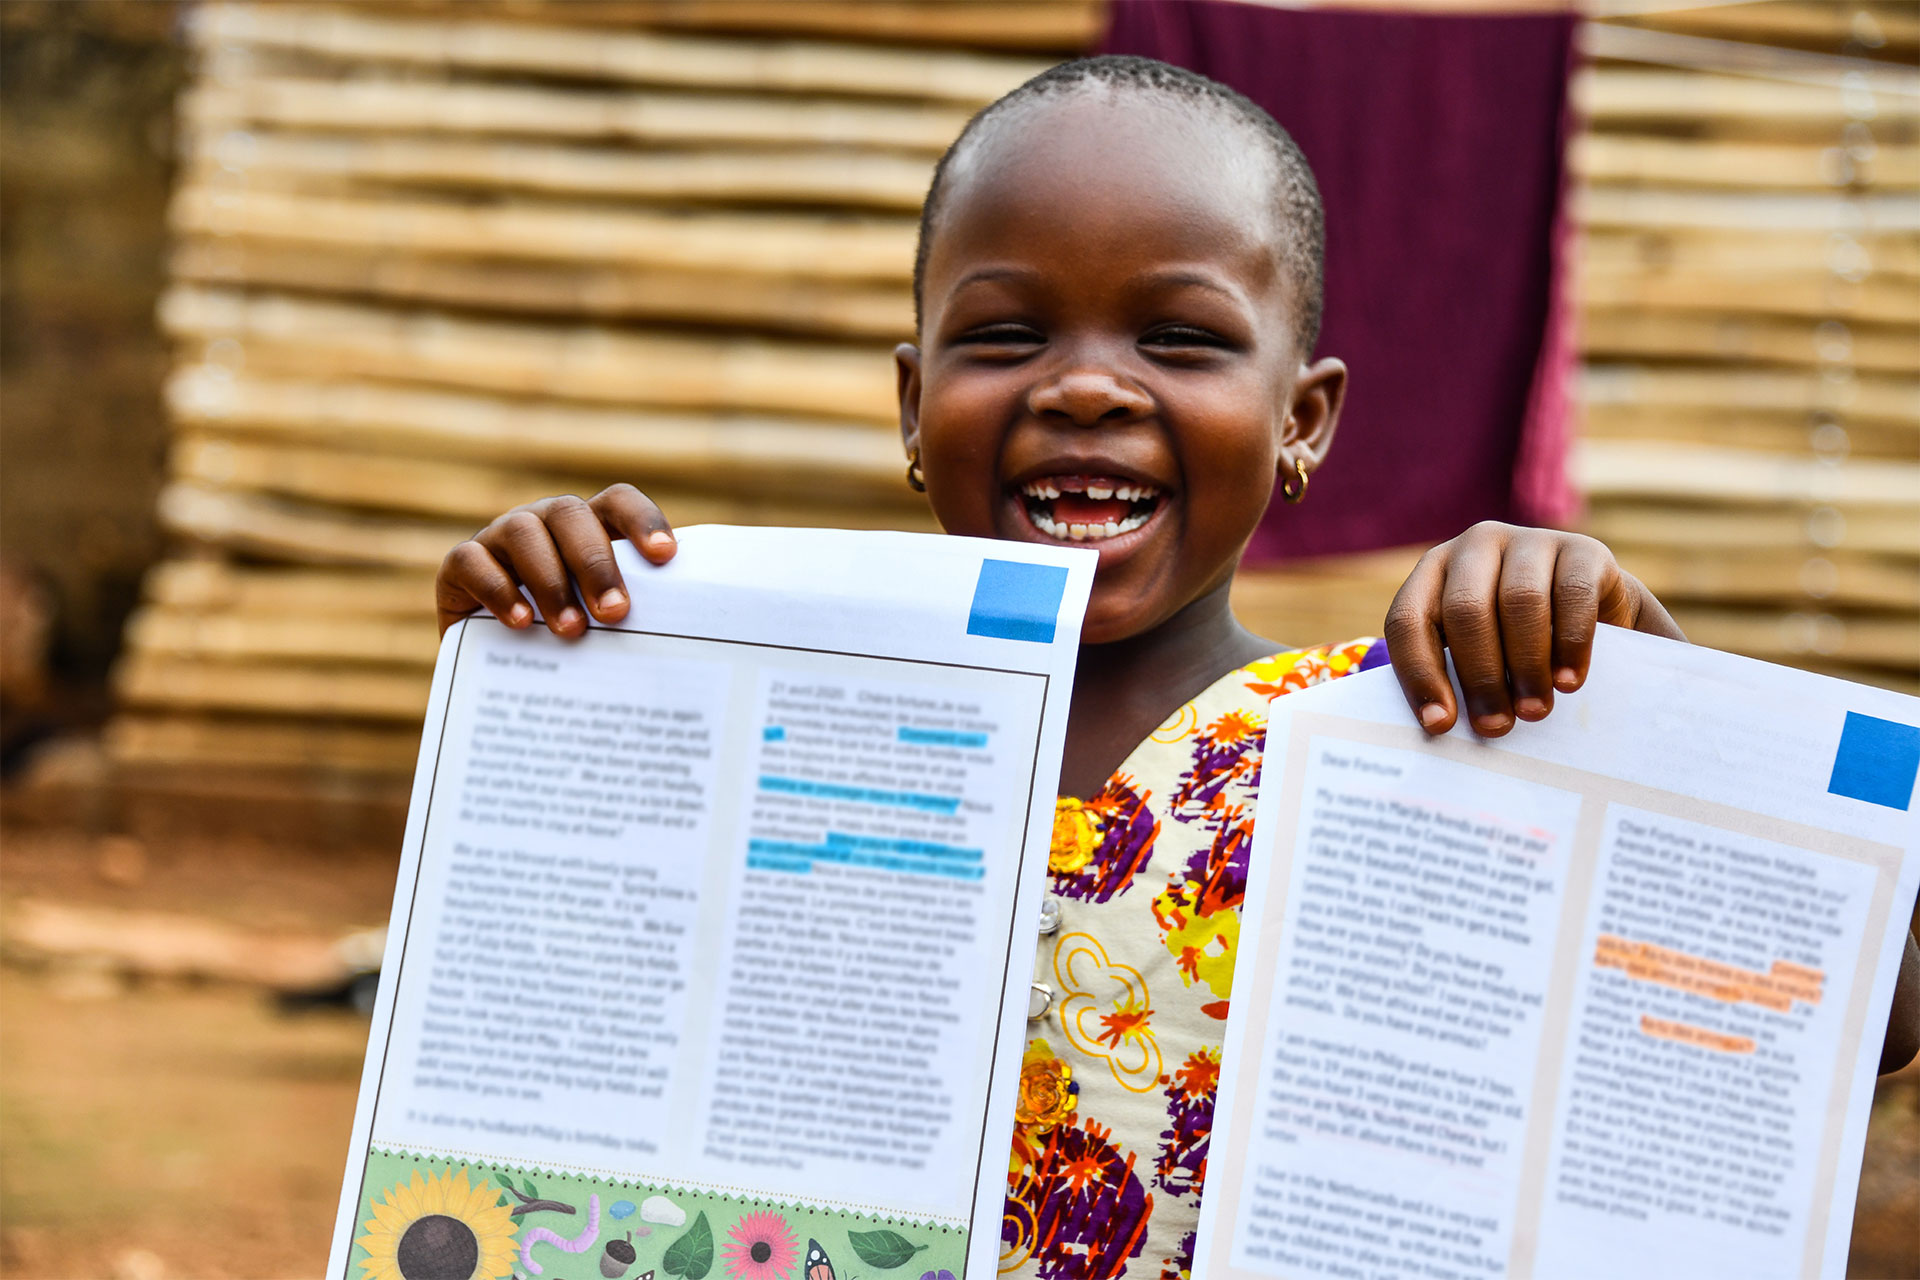 Fortune, a 6-year-old from Togo, holds letters from her sponsor